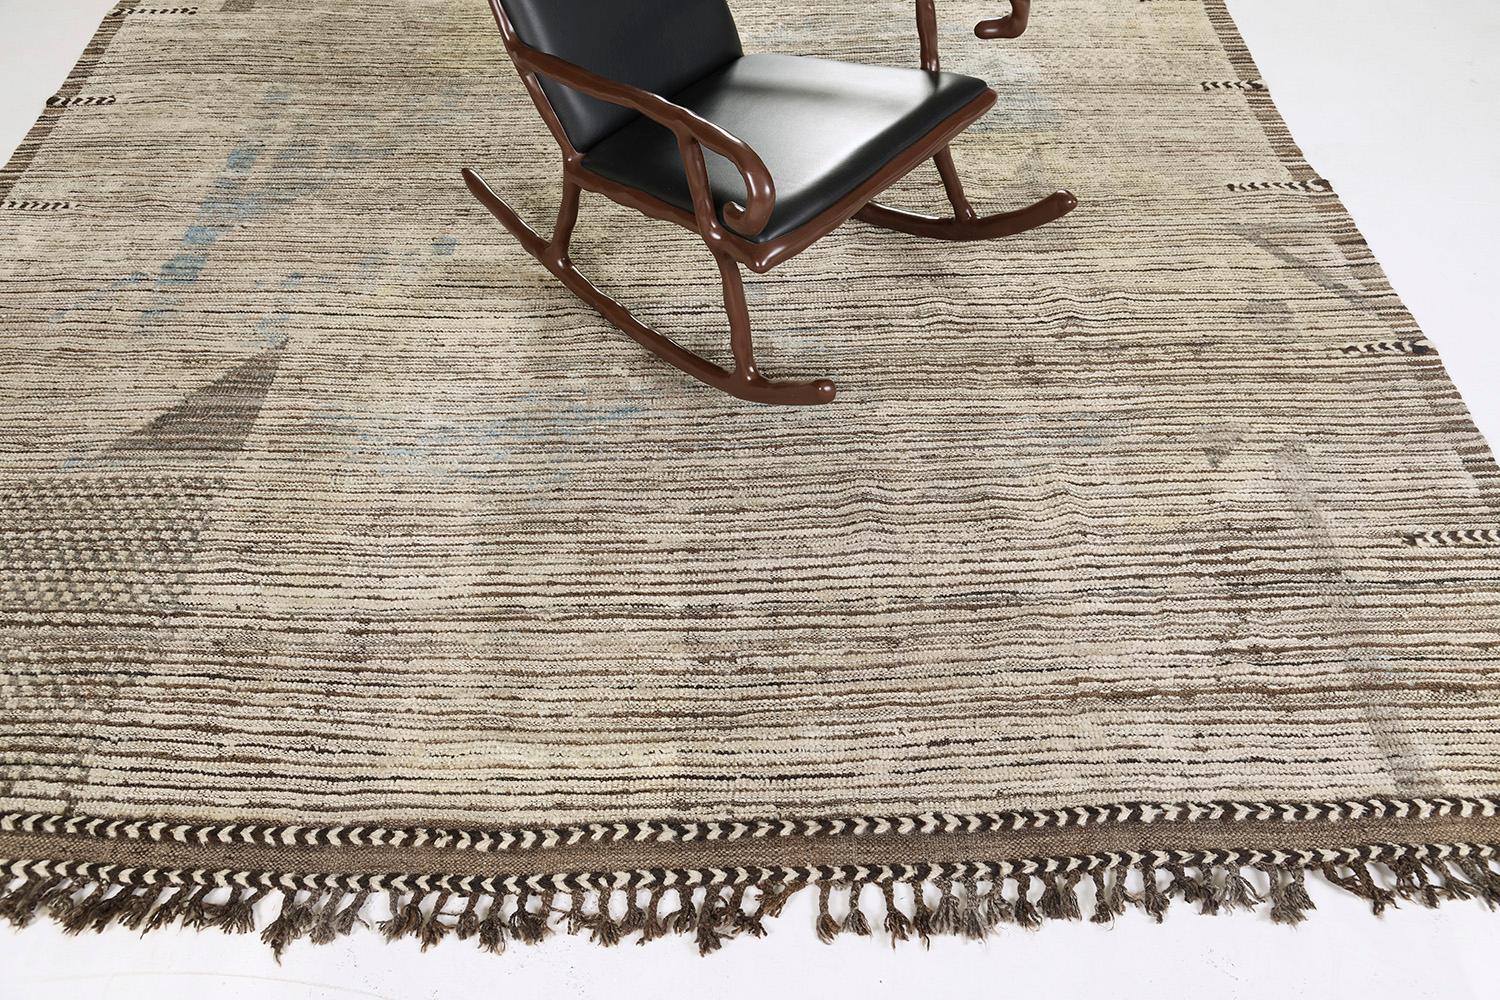 Kaouki is made of the gorgeous wool and is made of timeless design elements. The weaving of natural earth tones with unique design patterns and shapes is what makes the Atlas Collection so unique and sought after. Mehraban's Atlas collection is